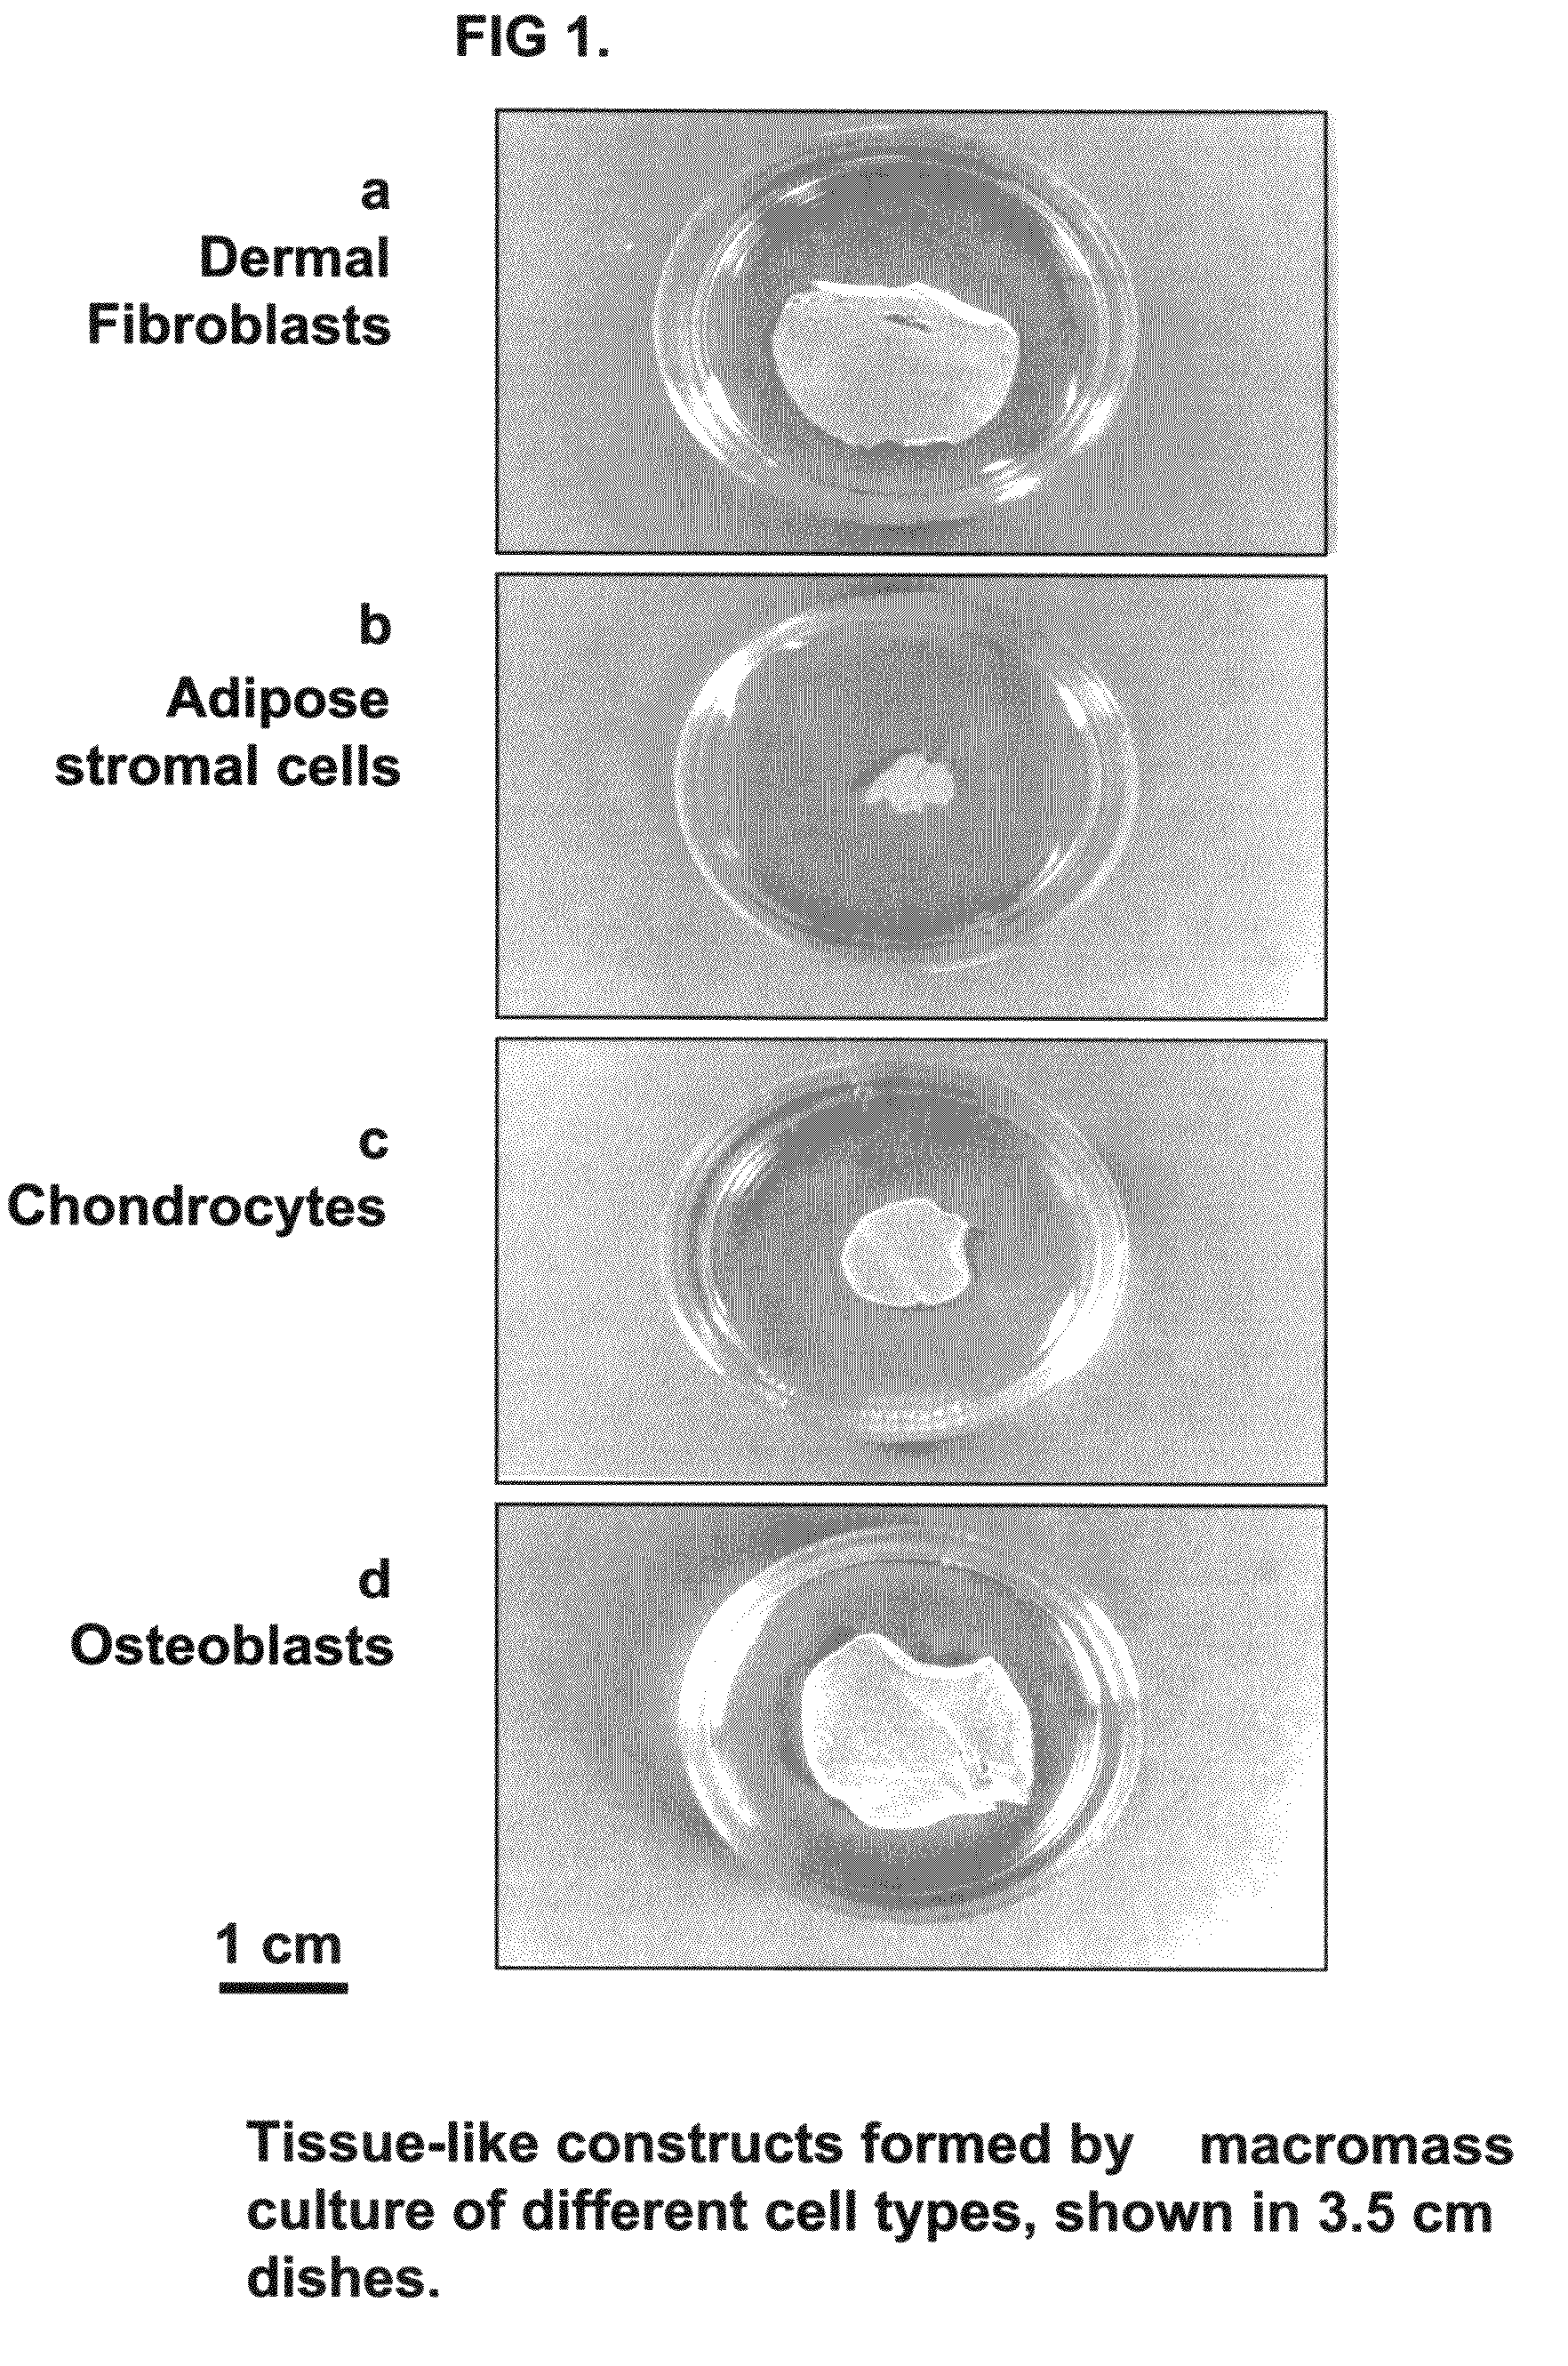 Tissue-like organization of cells and macroscopic tissue-like constructs, generated by macromass culture of cells and the method of macromass culture